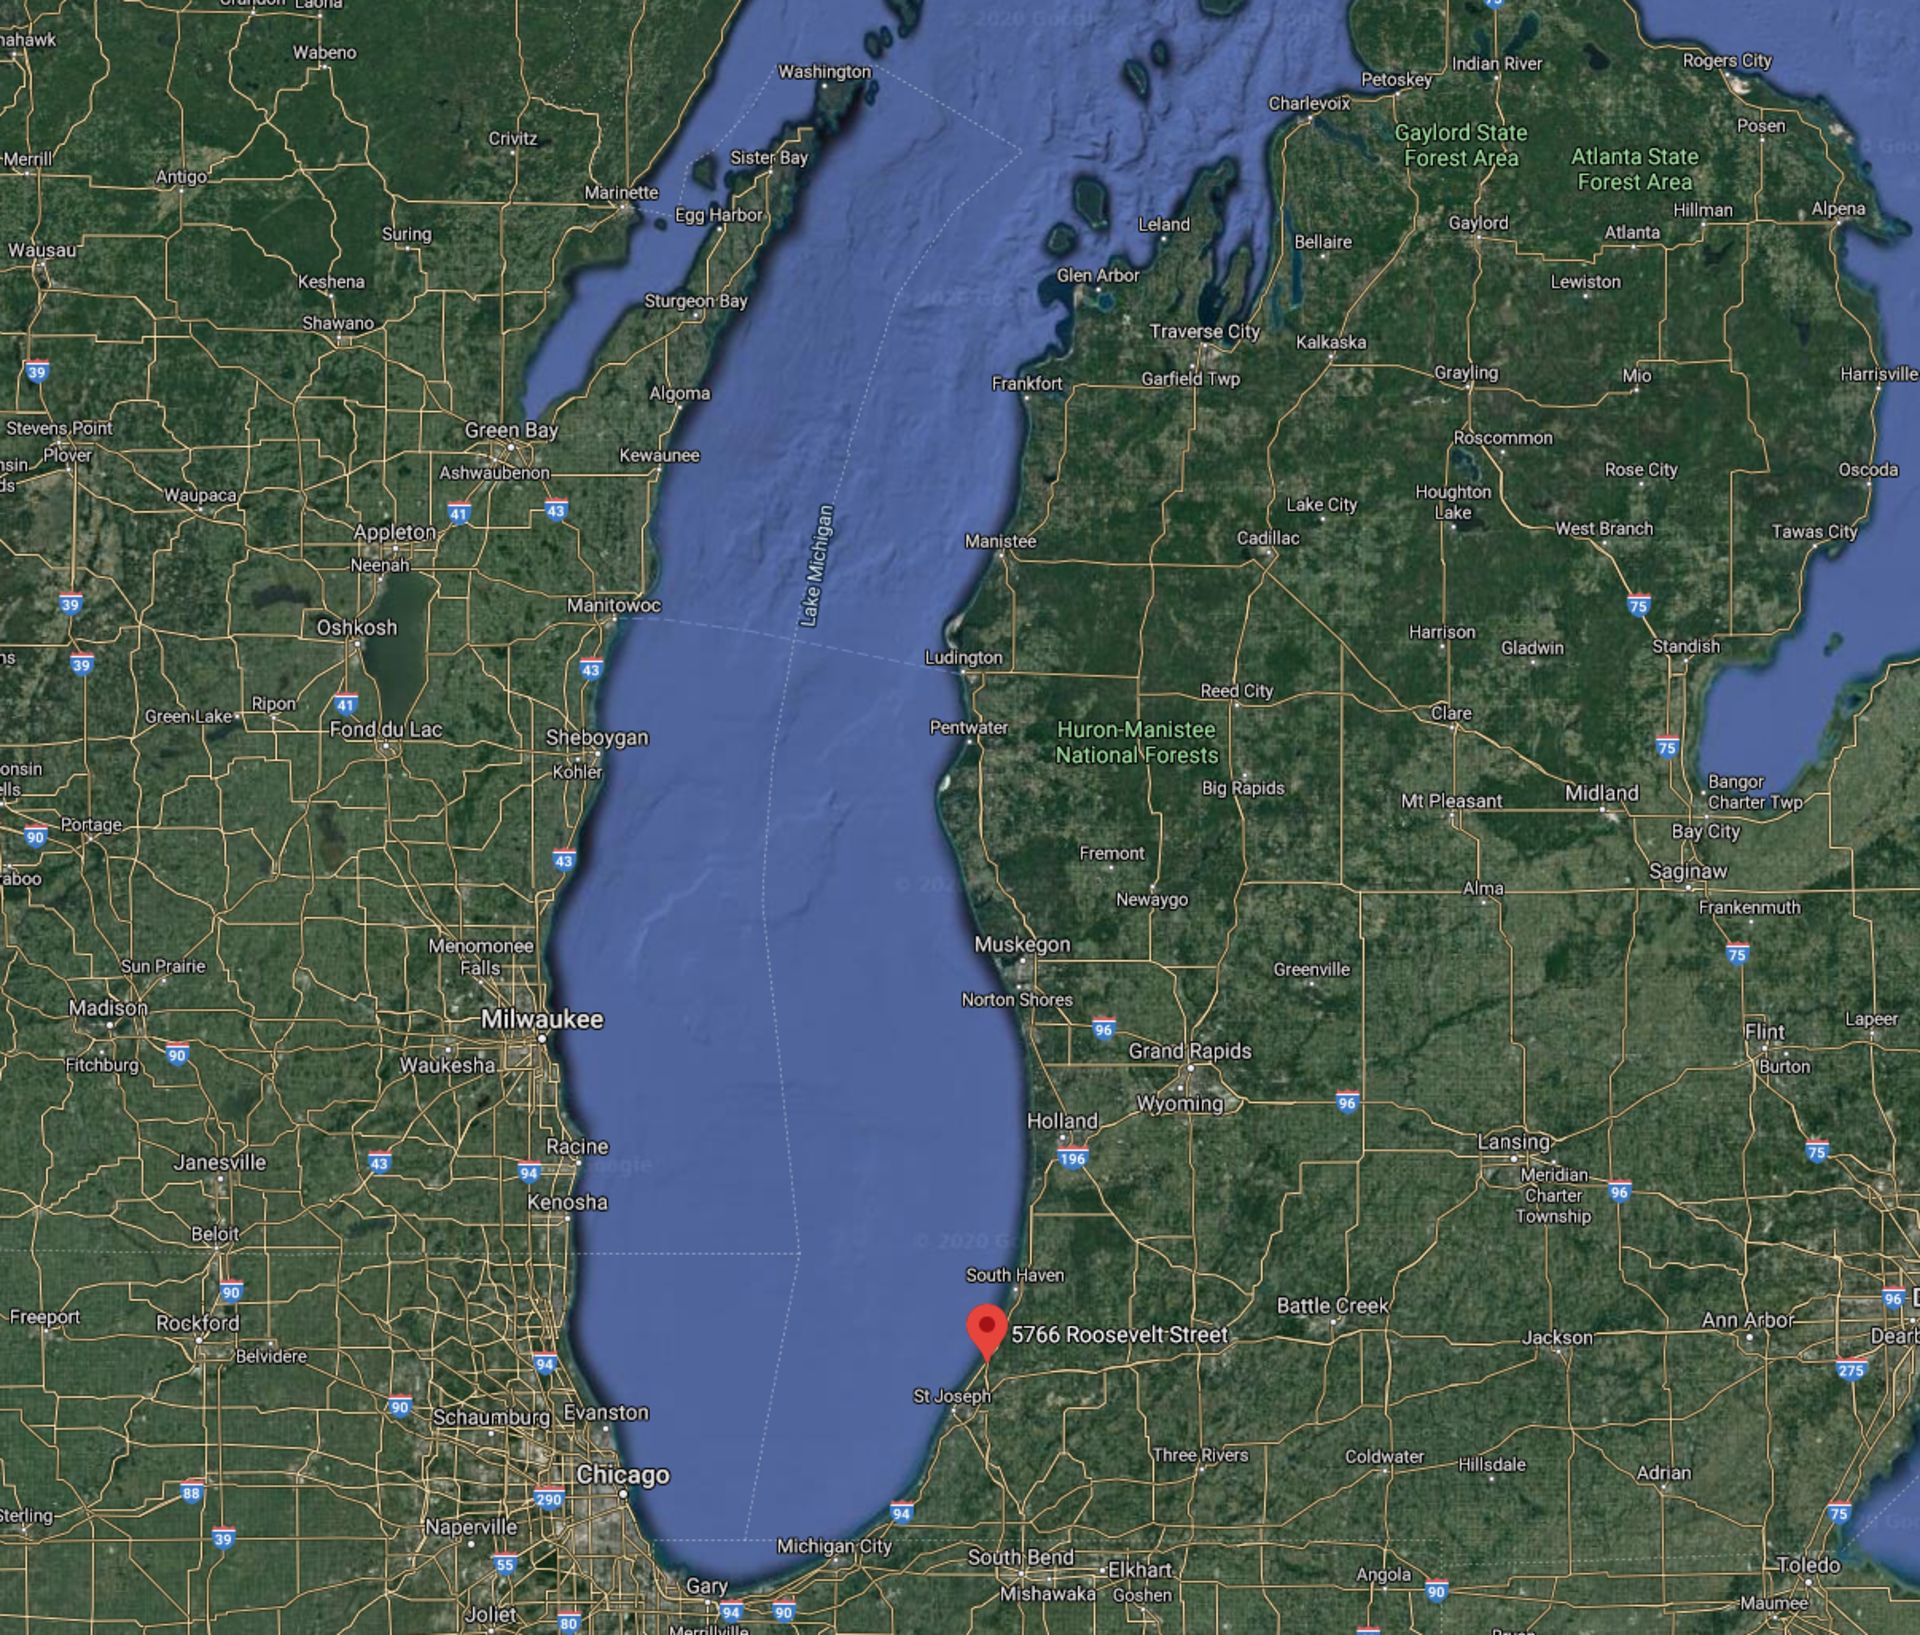 Live in the City of Benton Harbor, Michigan: Only One Mile from Lake Michigan! - Image 2 of 4